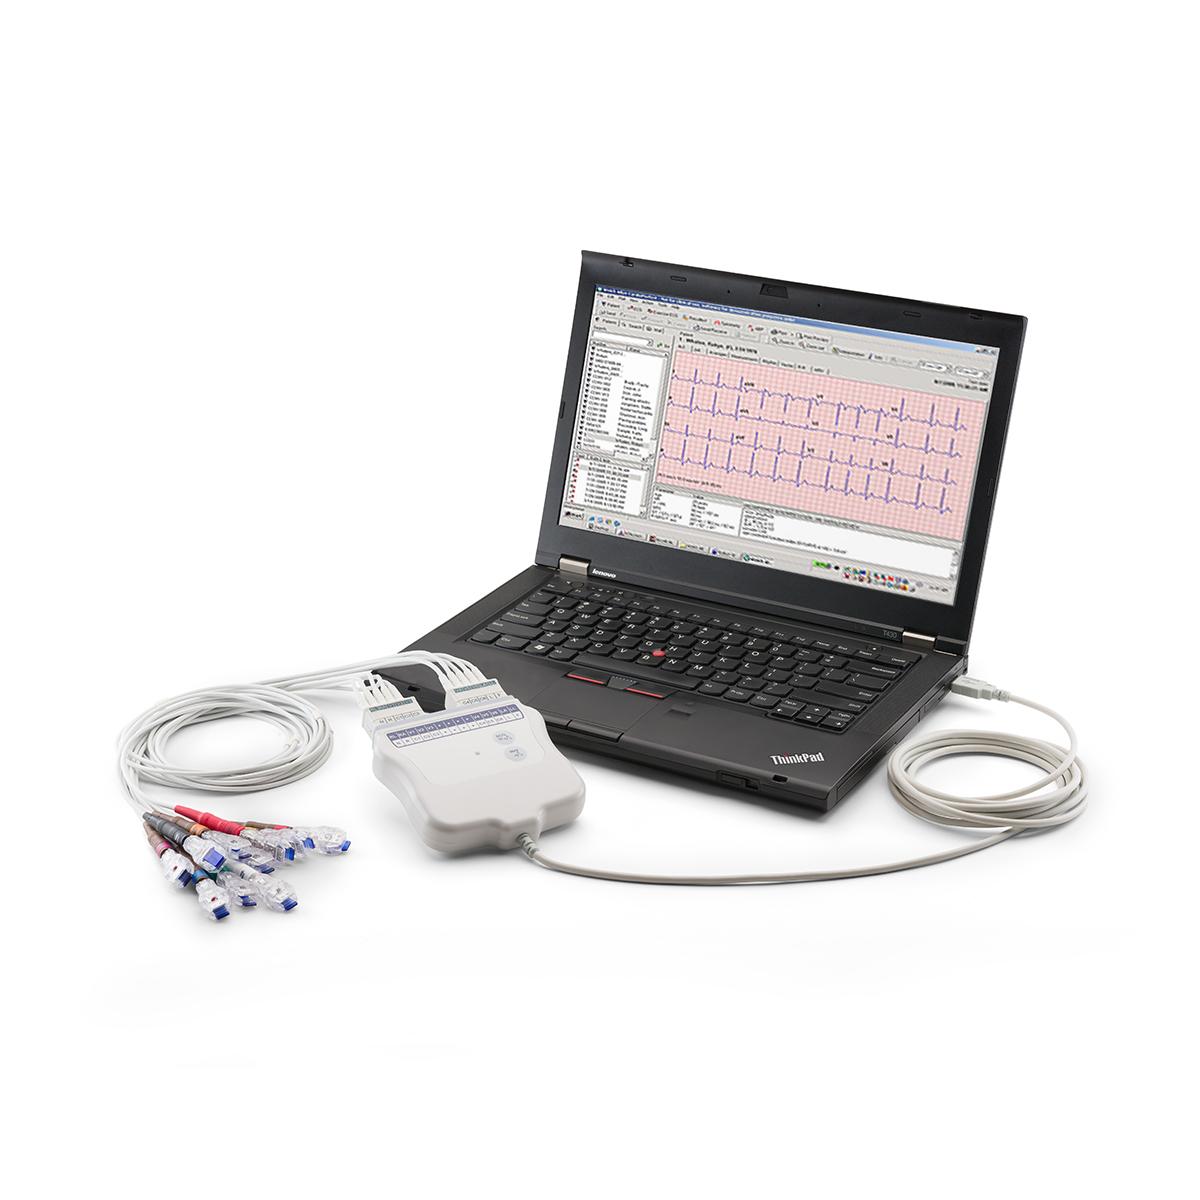 CardioPerfect Workstation Resting ECG linked via USB to a laptop computer, ¾ view